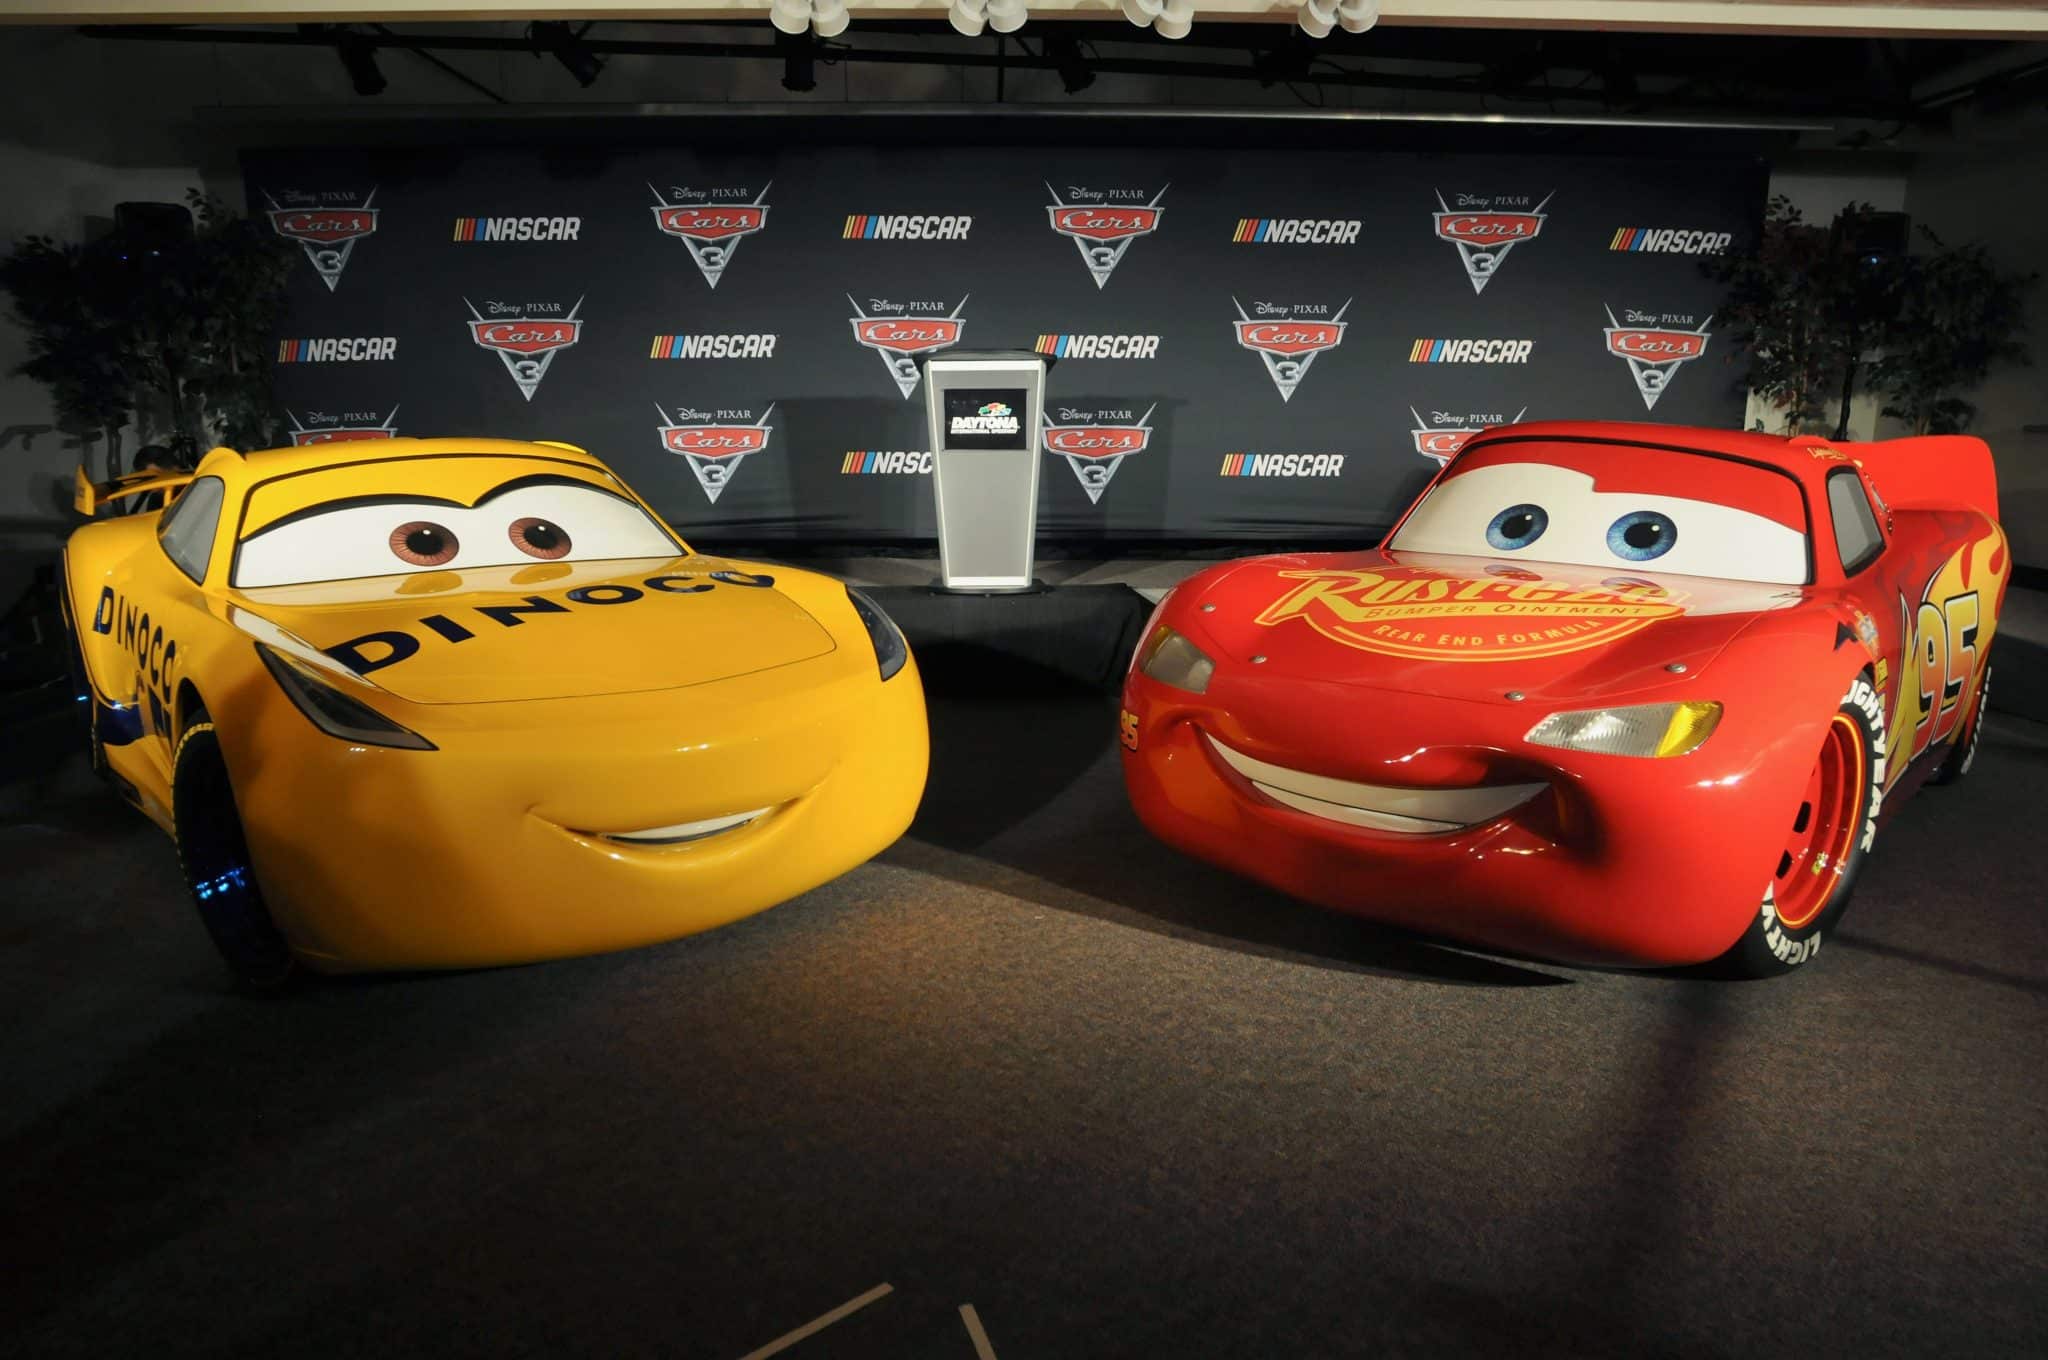 CARS 3 "Next Generation" Extended Look Now Available!!! #Cars3